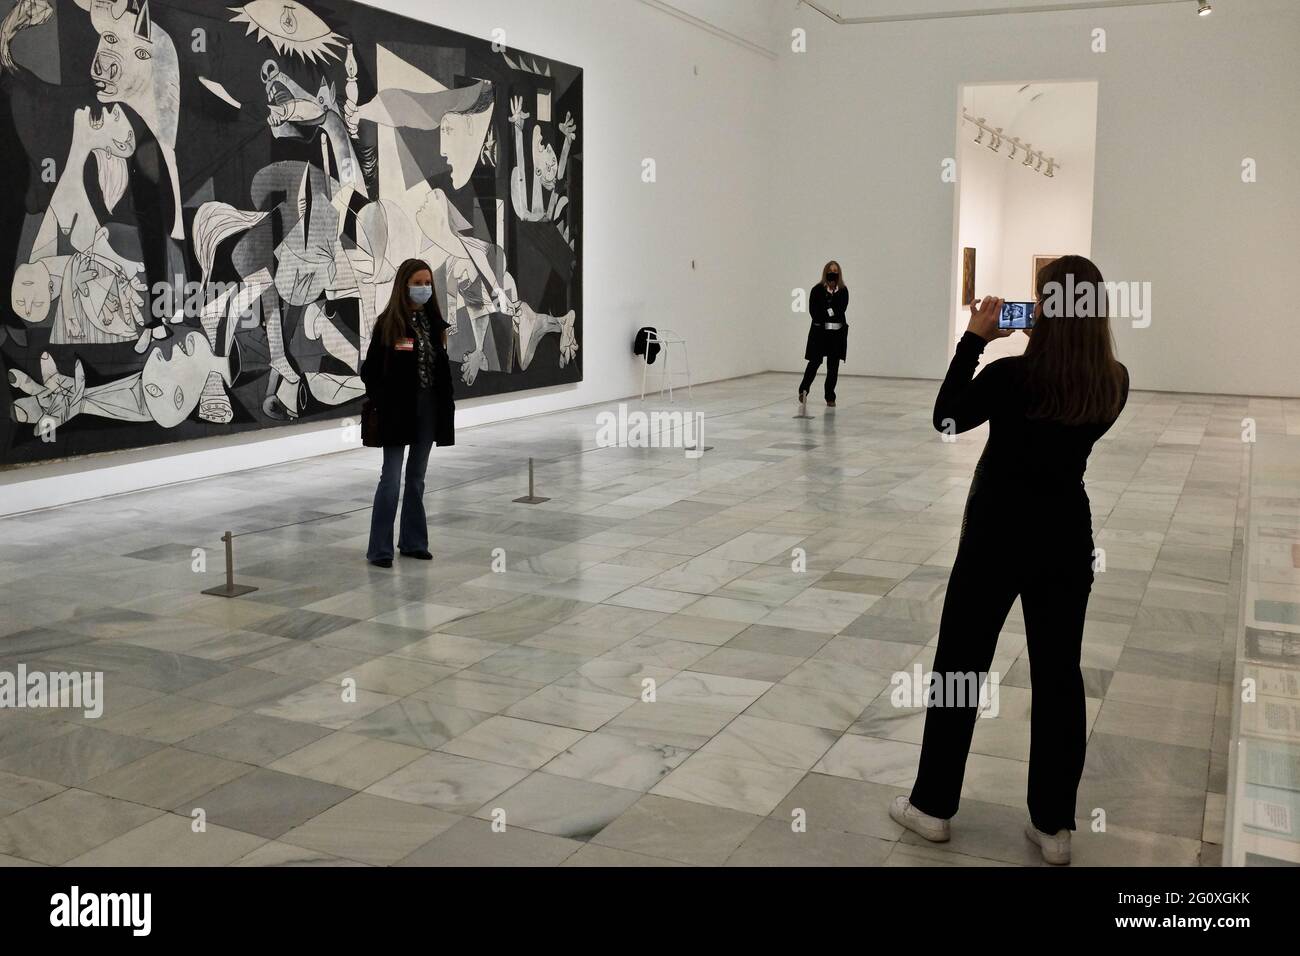 The famous Guernica, by Pablo Picasso, at the Reina Sofia museum, in Madrid, Spain. Stock Photo